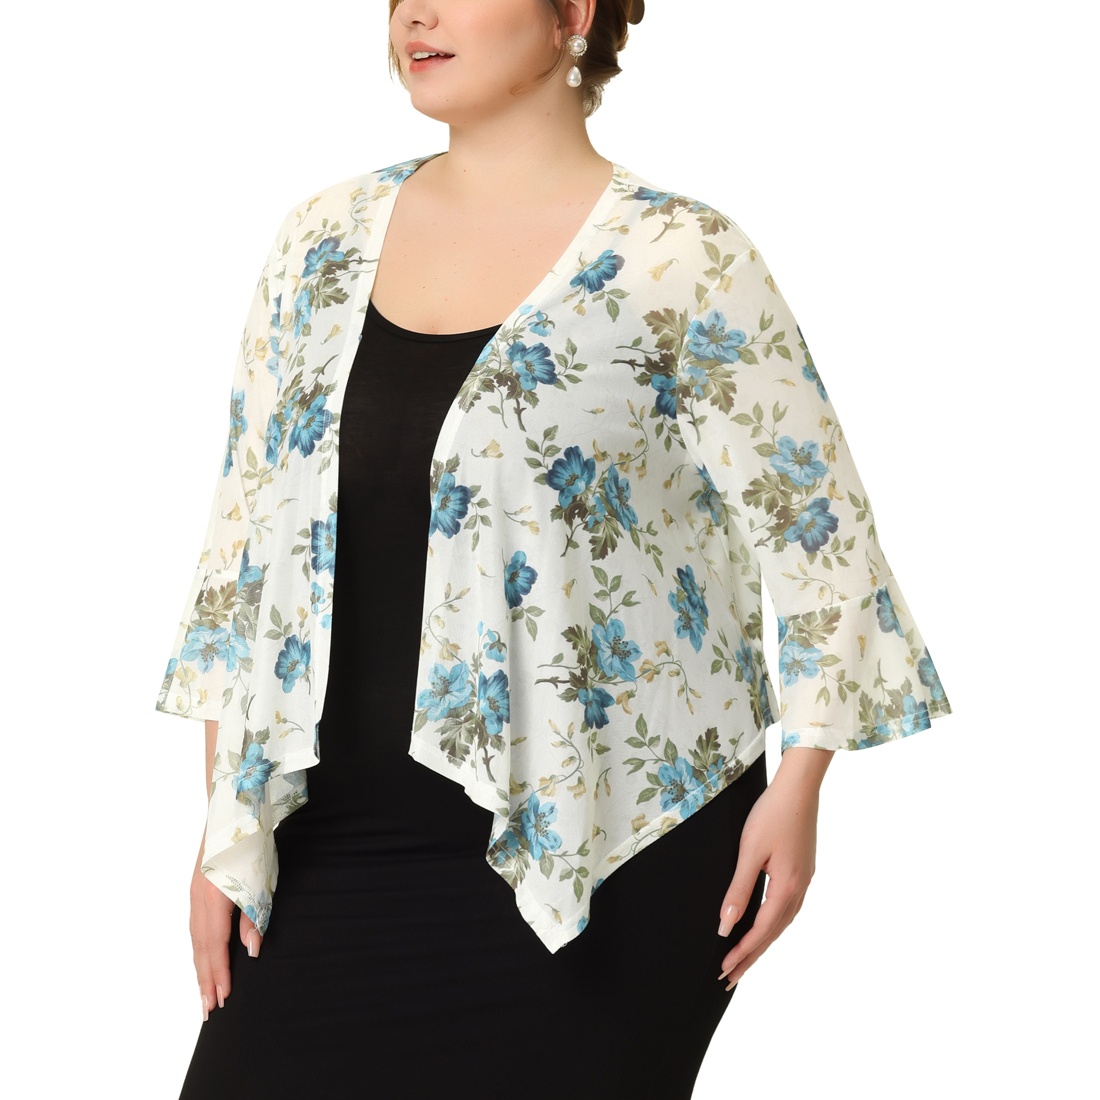 Unique Bargains Chiffon Cover Up for Women Plus Size 3/4 Sleeve Floral Printed Bikini Lightweight Summer Cardigans